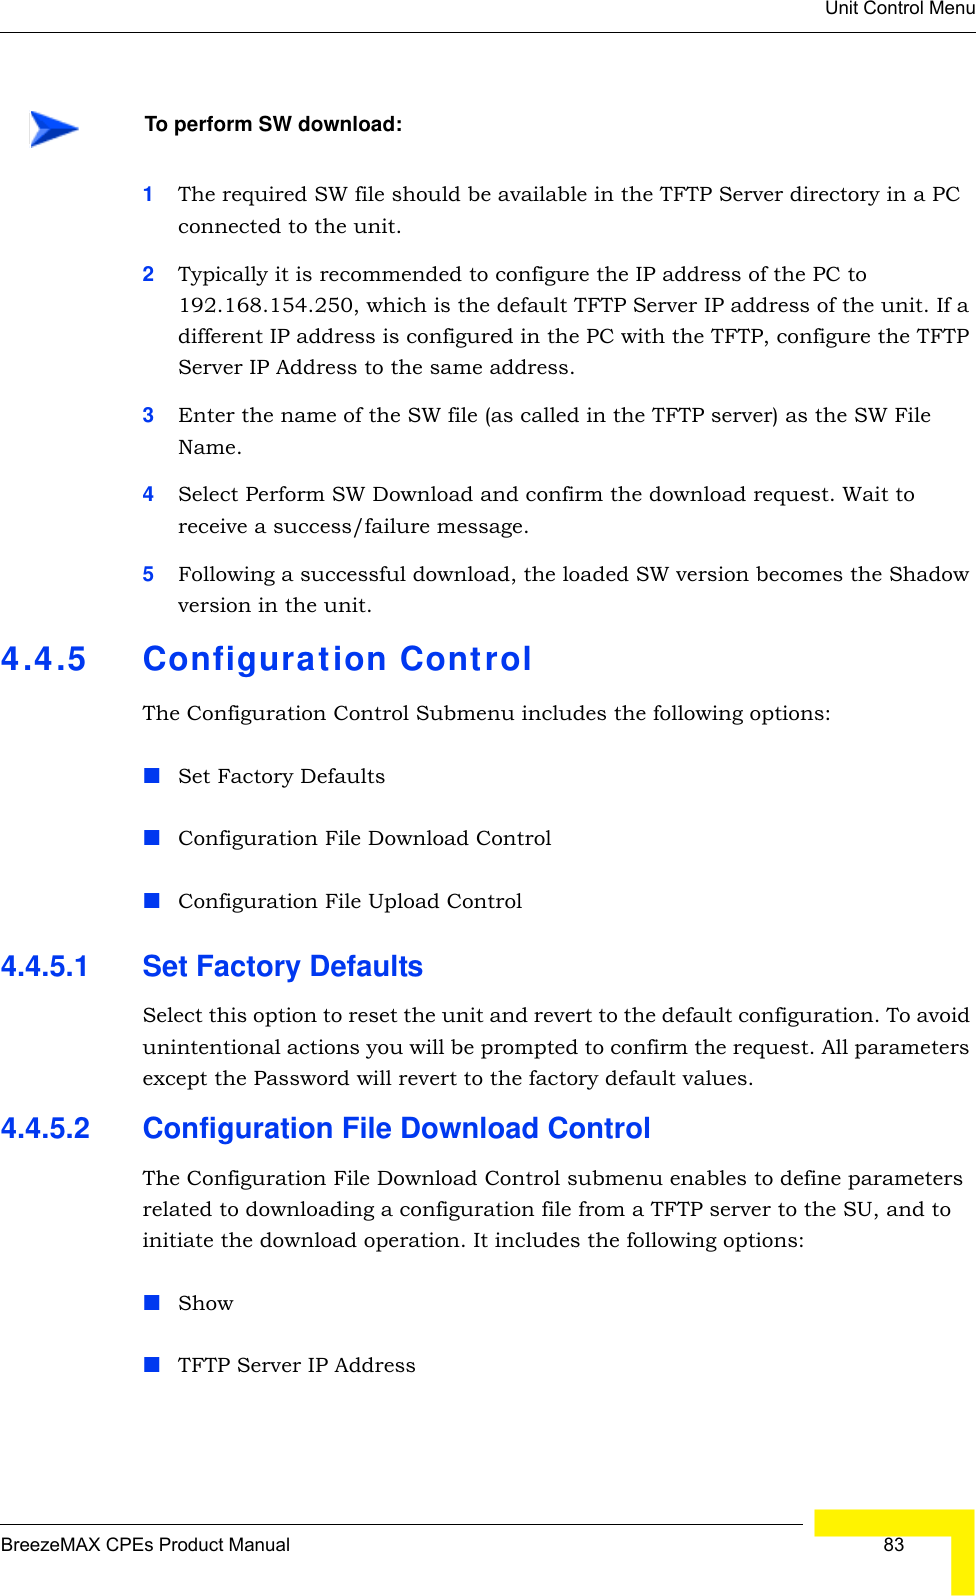 Unit Control MenuBreezeMAX CPEs Product Manual  831The required SW file should be available in the TFTP Server directory in a PC connected to the unit. 2Typically it is recommended to configure the IP address of the PC to 192.168.154.250, which is the default TFTP Server IP address of the unit. If a different IP address is configured in the PC with the TFTP, configure the TFTP Server IP Address to the same address.3Enter the name of the SW file (as called in the TFTP server) as the SW File Name.4Select Perform SW Download and confirm the download request. Wait to receive a success/failure message.5Following a successful download, the loaded SW version becomes the Shadow version in the unit.4.4.5 Configuration ControlThe Configuration Control Submenu includes the following options:Set Factory DefaultsConfiguration File Download ControlConfiguration File Upload Control4.4.5.1 Set Factory DefaultsSelect this option to reset the unit and revert to the default configuration. To avoid unintentional actions you will be prompted to confirm the request. All parameters except the Password will revert to the factory default values.4.4.5.2 Configuration File Download ControlThe Configuration File Download Control submenu enables to define parameters related to downloading a configuration file from a TFTP server to the SU, and to initiate the download operation. It includes the following options:ShowTFTP Server IP AddressTo perform SW download: